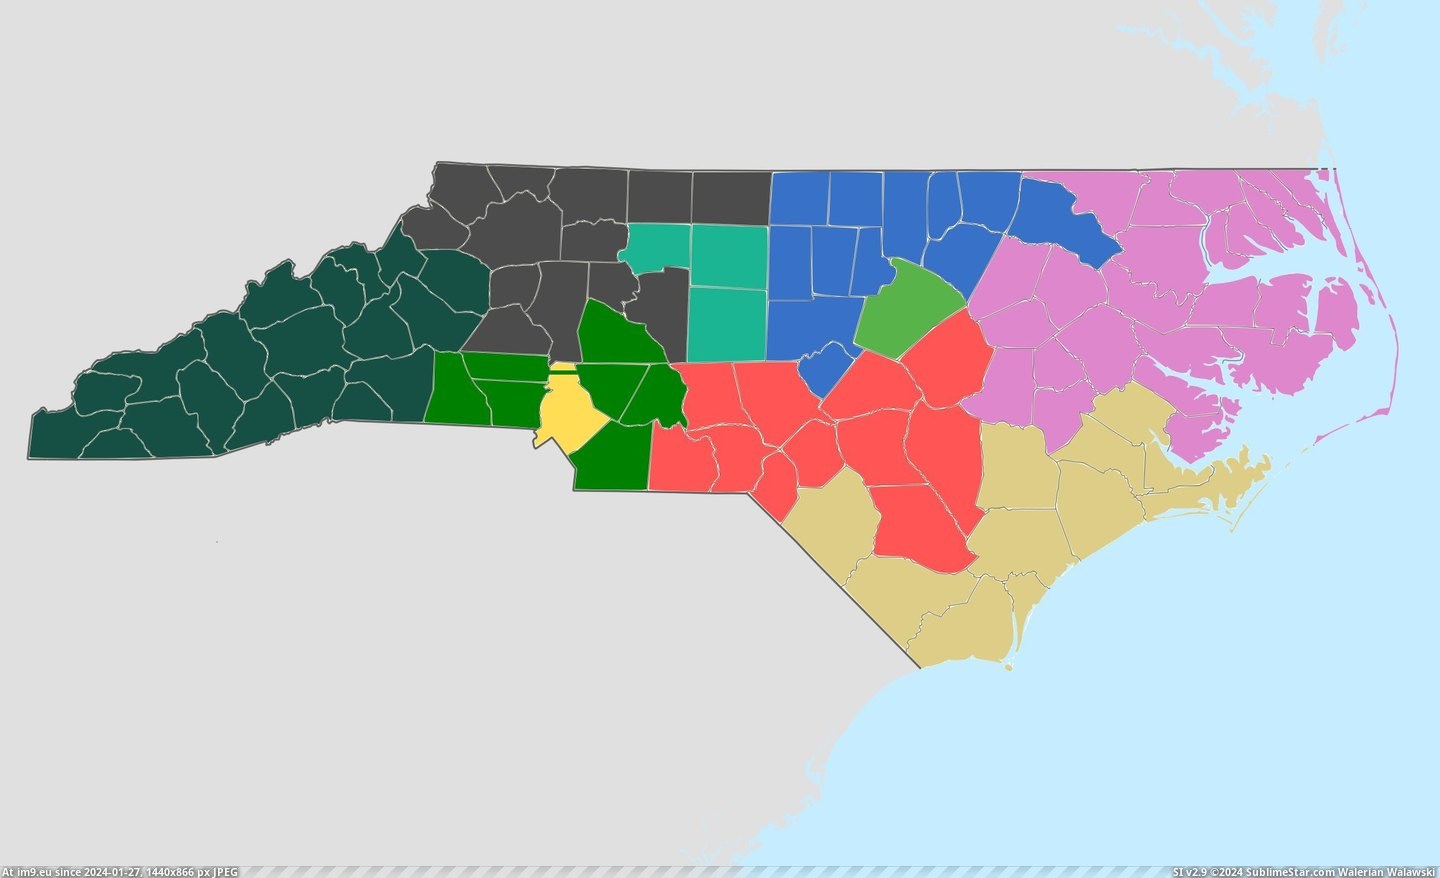 #Map #People #North #Sections #Aprox #Population #Carolina #Split [Mapporn] Map Of North Carolina Split Into 10 Sections with a Population of Aprox. 1,000,000 People Each [2333x1415] [OC] Pic. (Image of album My r/MAPS favs))